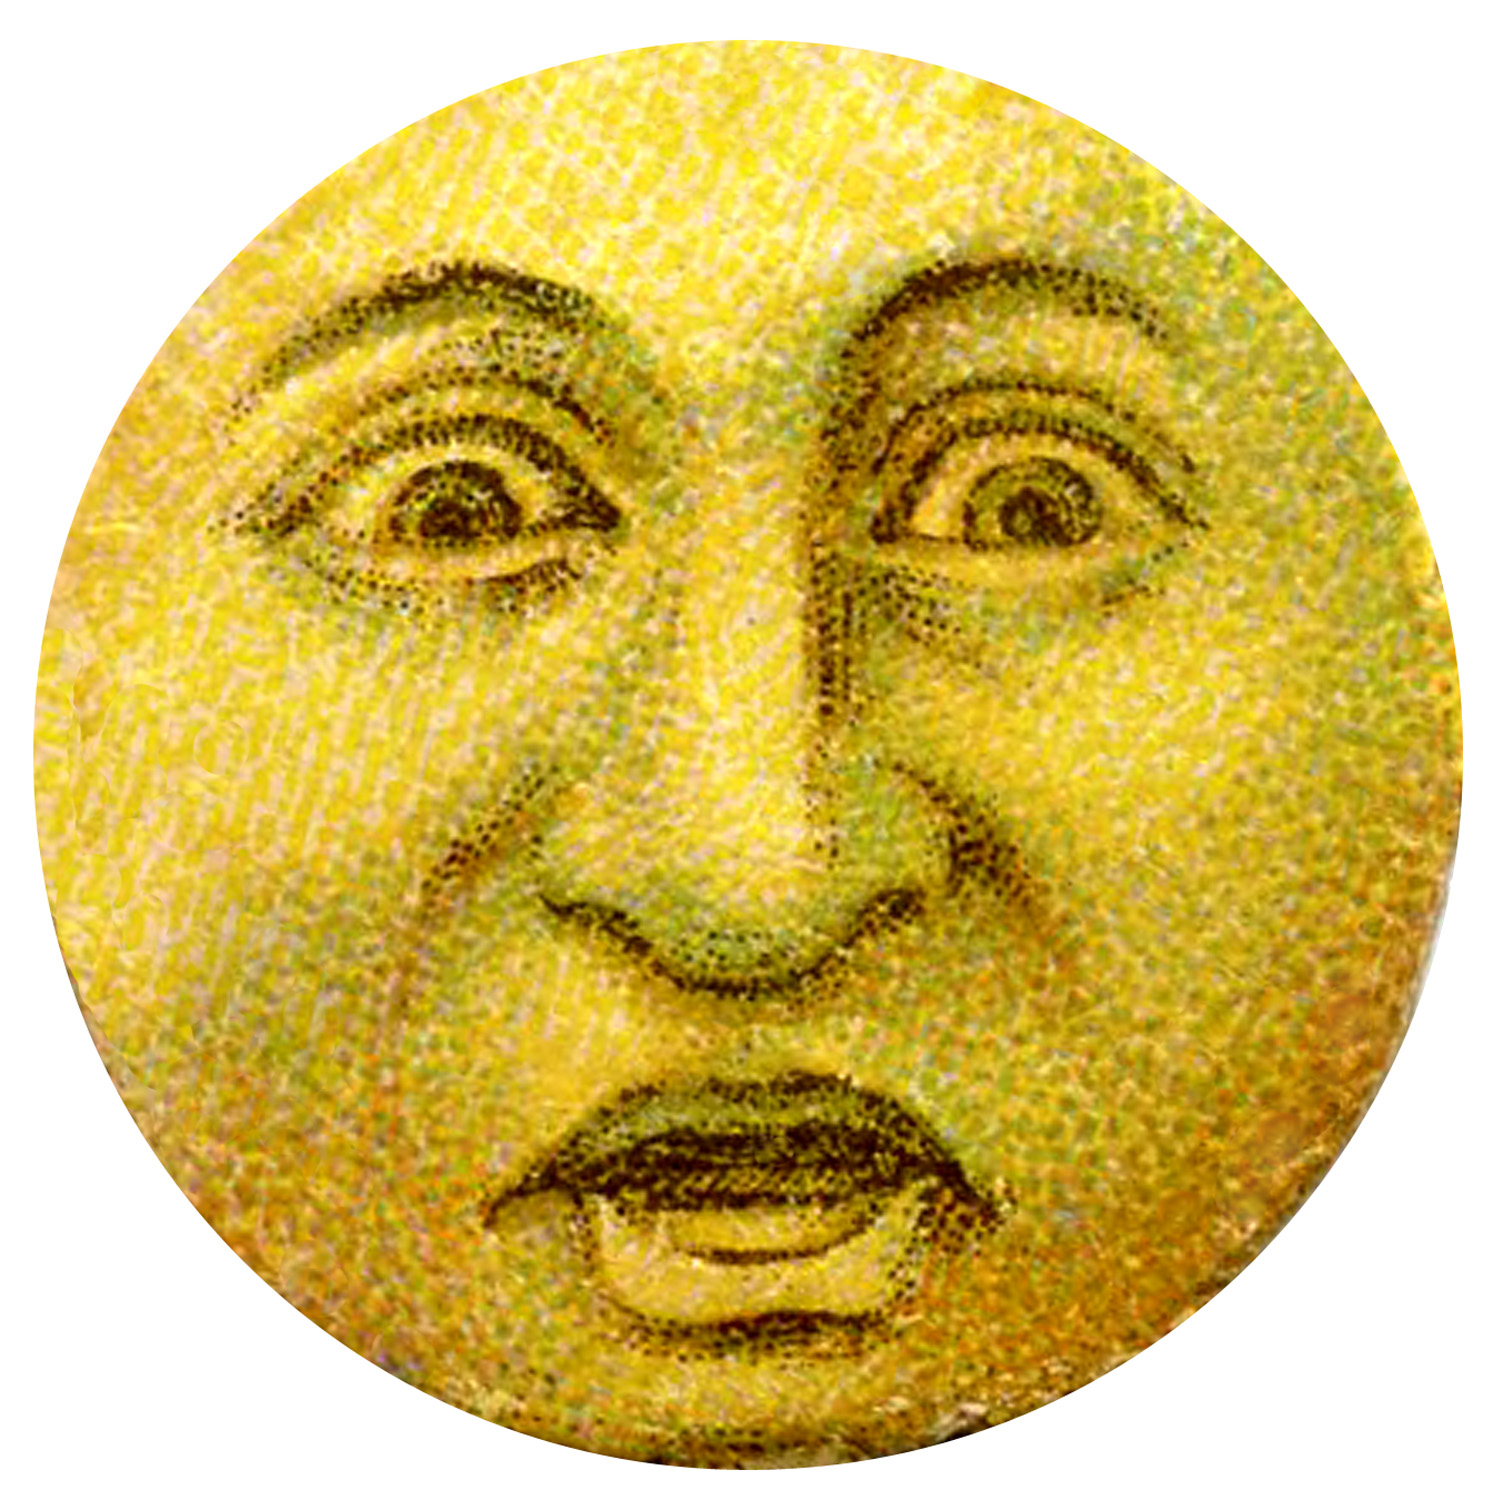 man in the moon clipart - photo #24